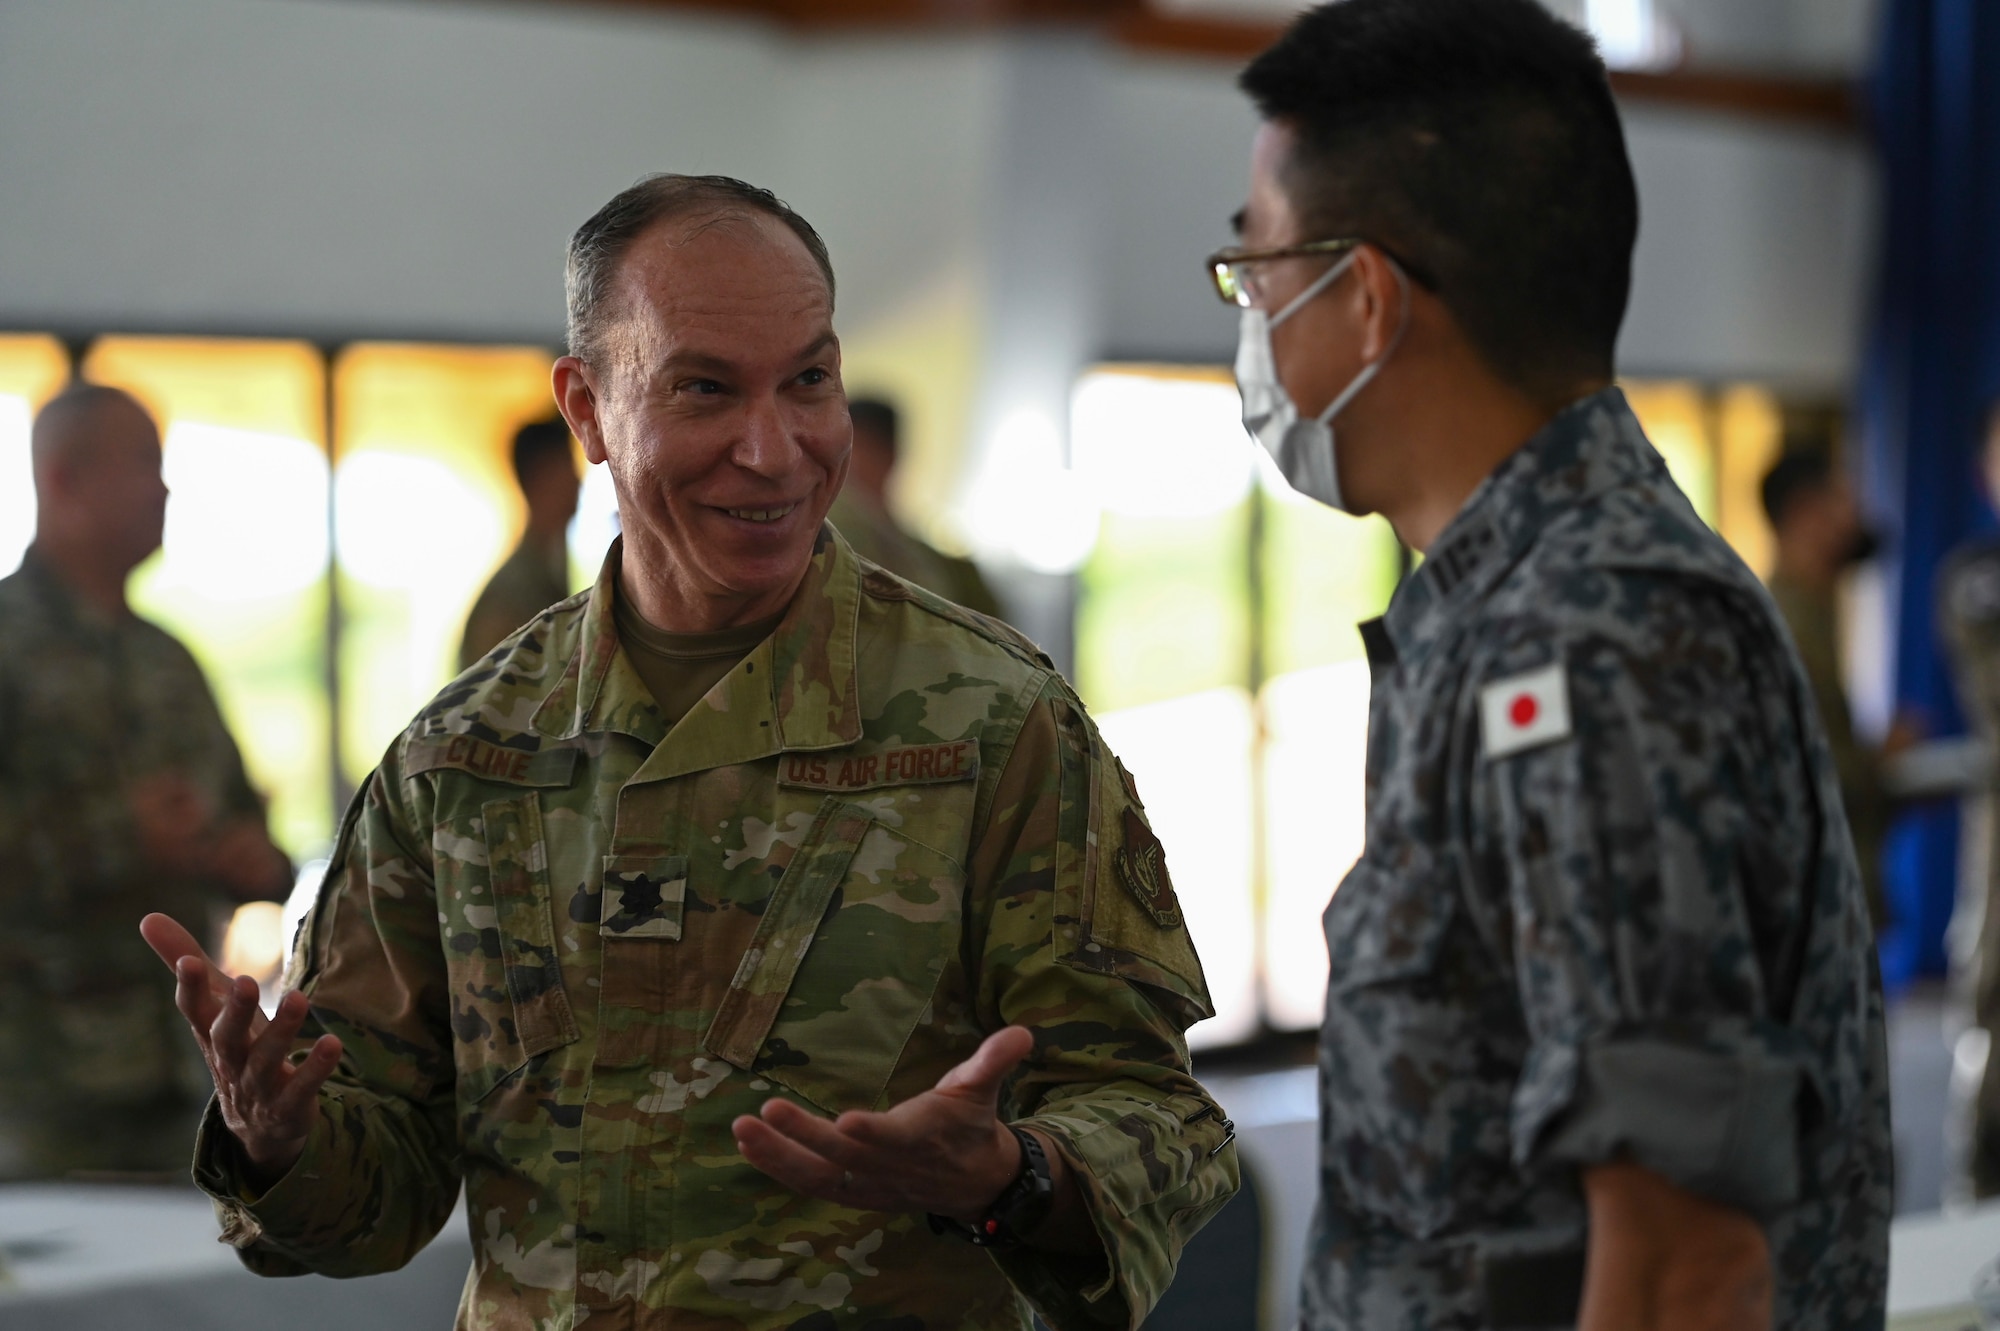 U.S. Air Force Lt. Col. Scott Cline, Chief of Civil Engineer Division, Fifth Air Force Headquarters, speaks with a member of the Japan Air Self-Defense Force during the Pacific Unity Multi-Lateral Civil Engineer Key Leader Engagement, June 22, 2022 at Andersen Air Force Base, Guam. Themes during this KLE included topics of shared interest across the allies and partners such as joint capabilities, leveraging expertise in the Total Force, and increased frequency of subject matter expert exchanges and multi-lateral training.   (U.S. Air Force Photo by Airman 1st Class Emily Saxton)